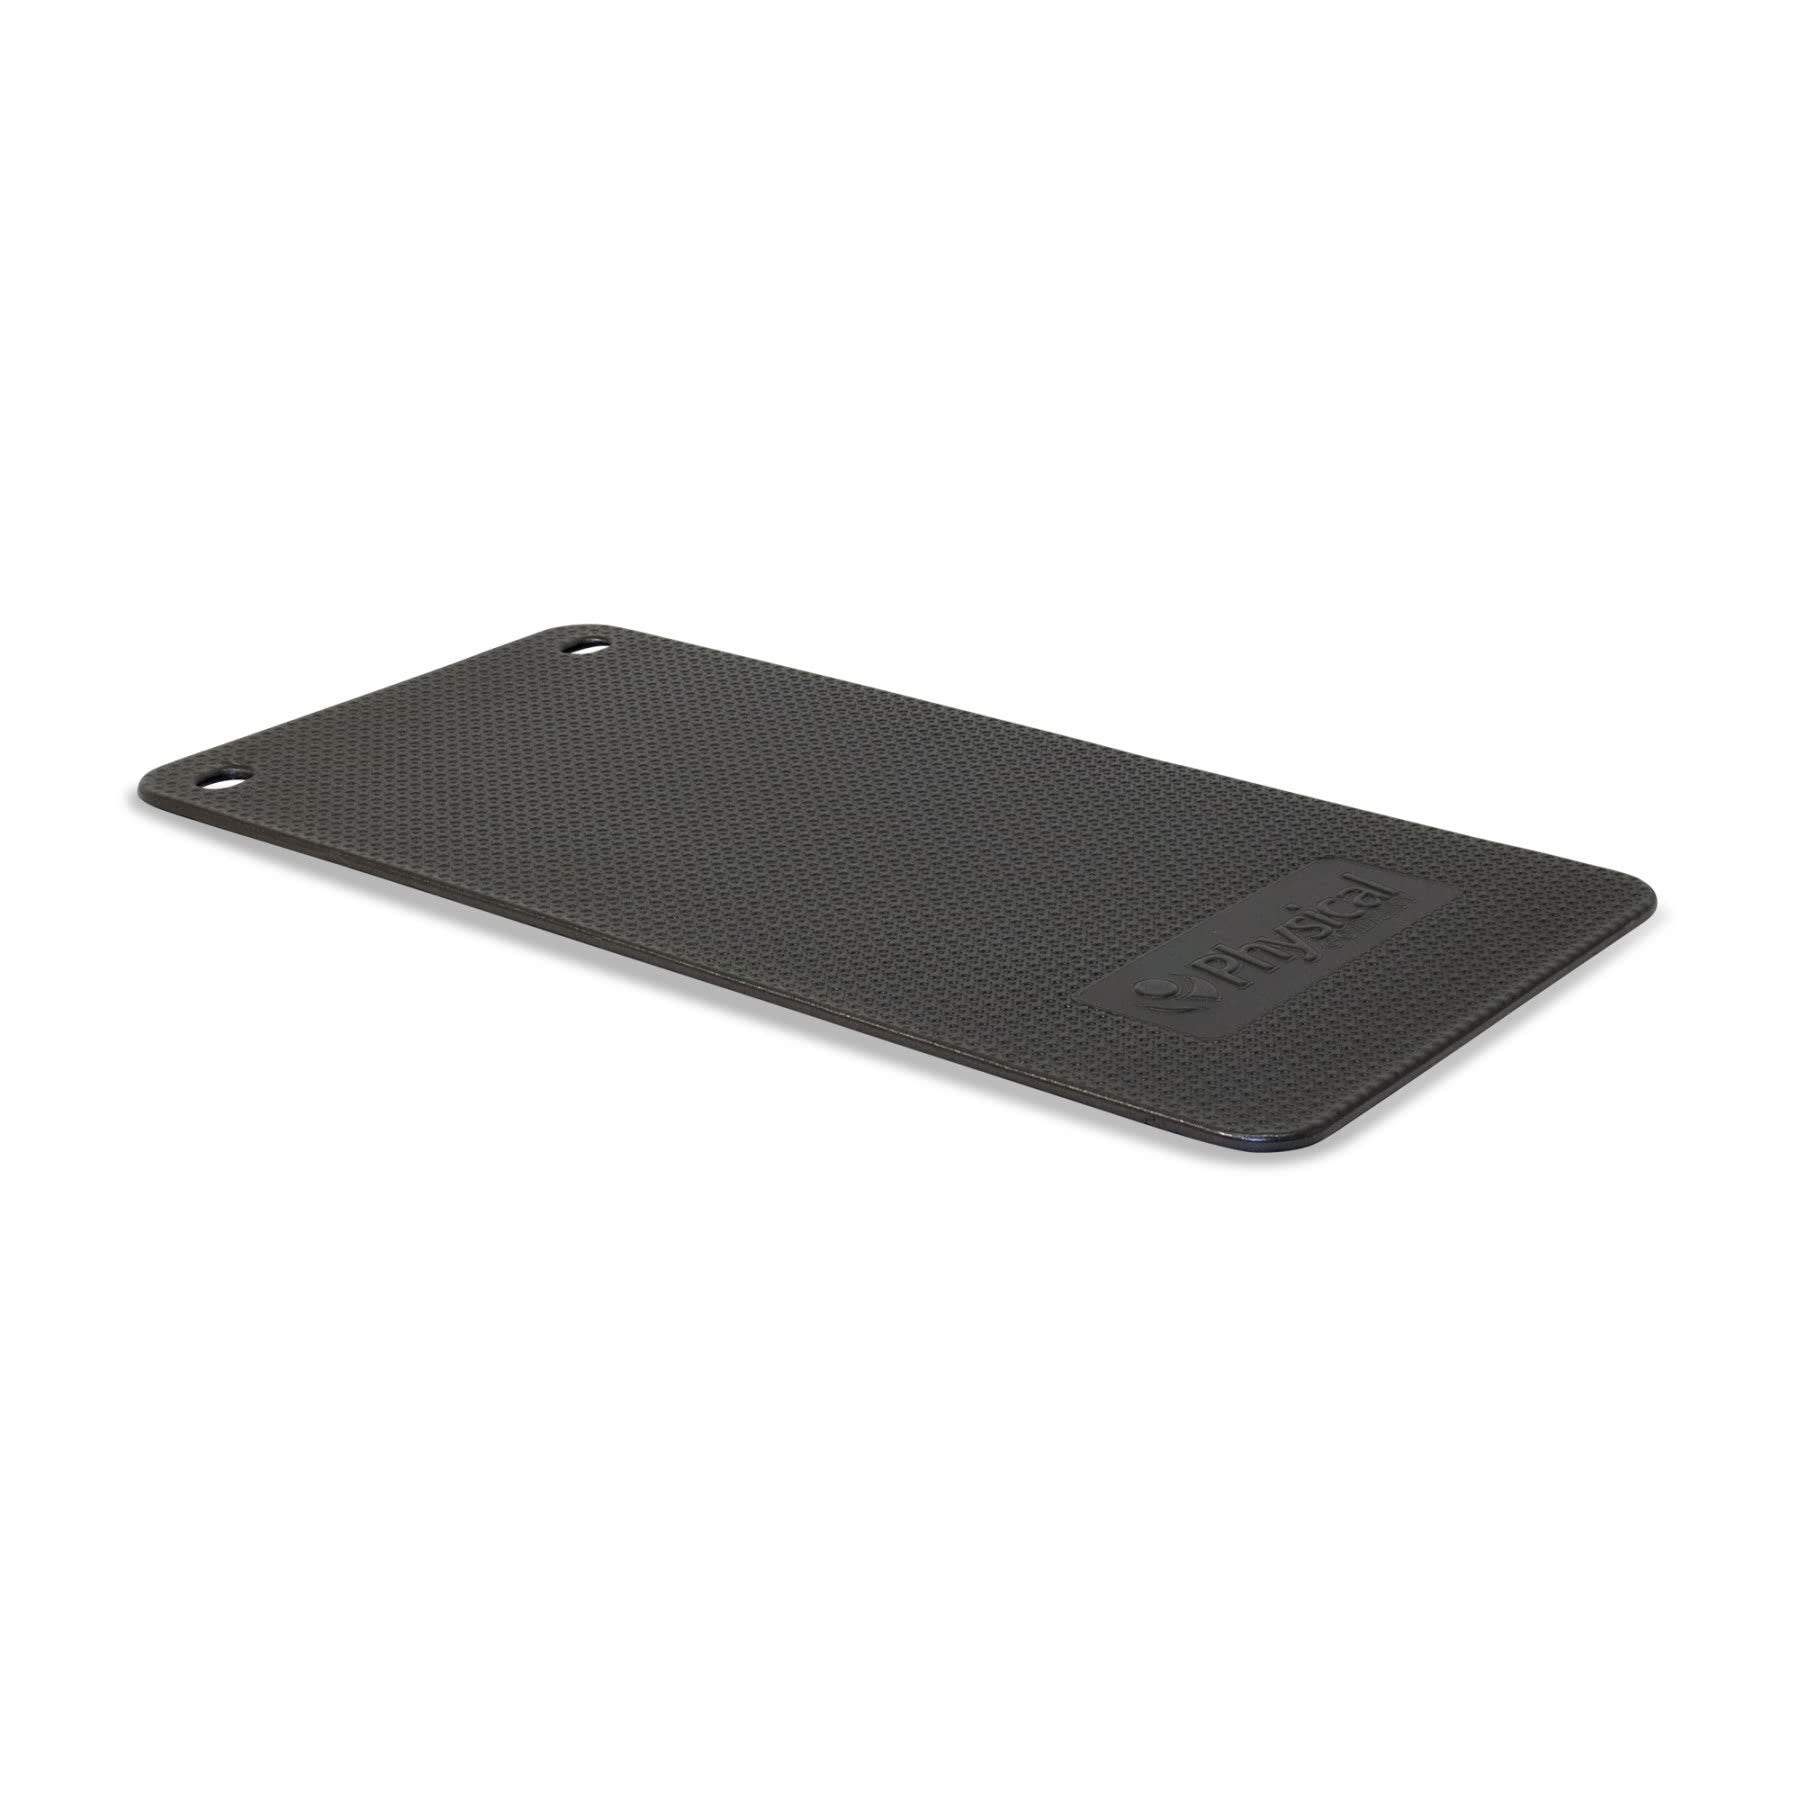 a black fitness exercise mat with eyelets for wall mounting